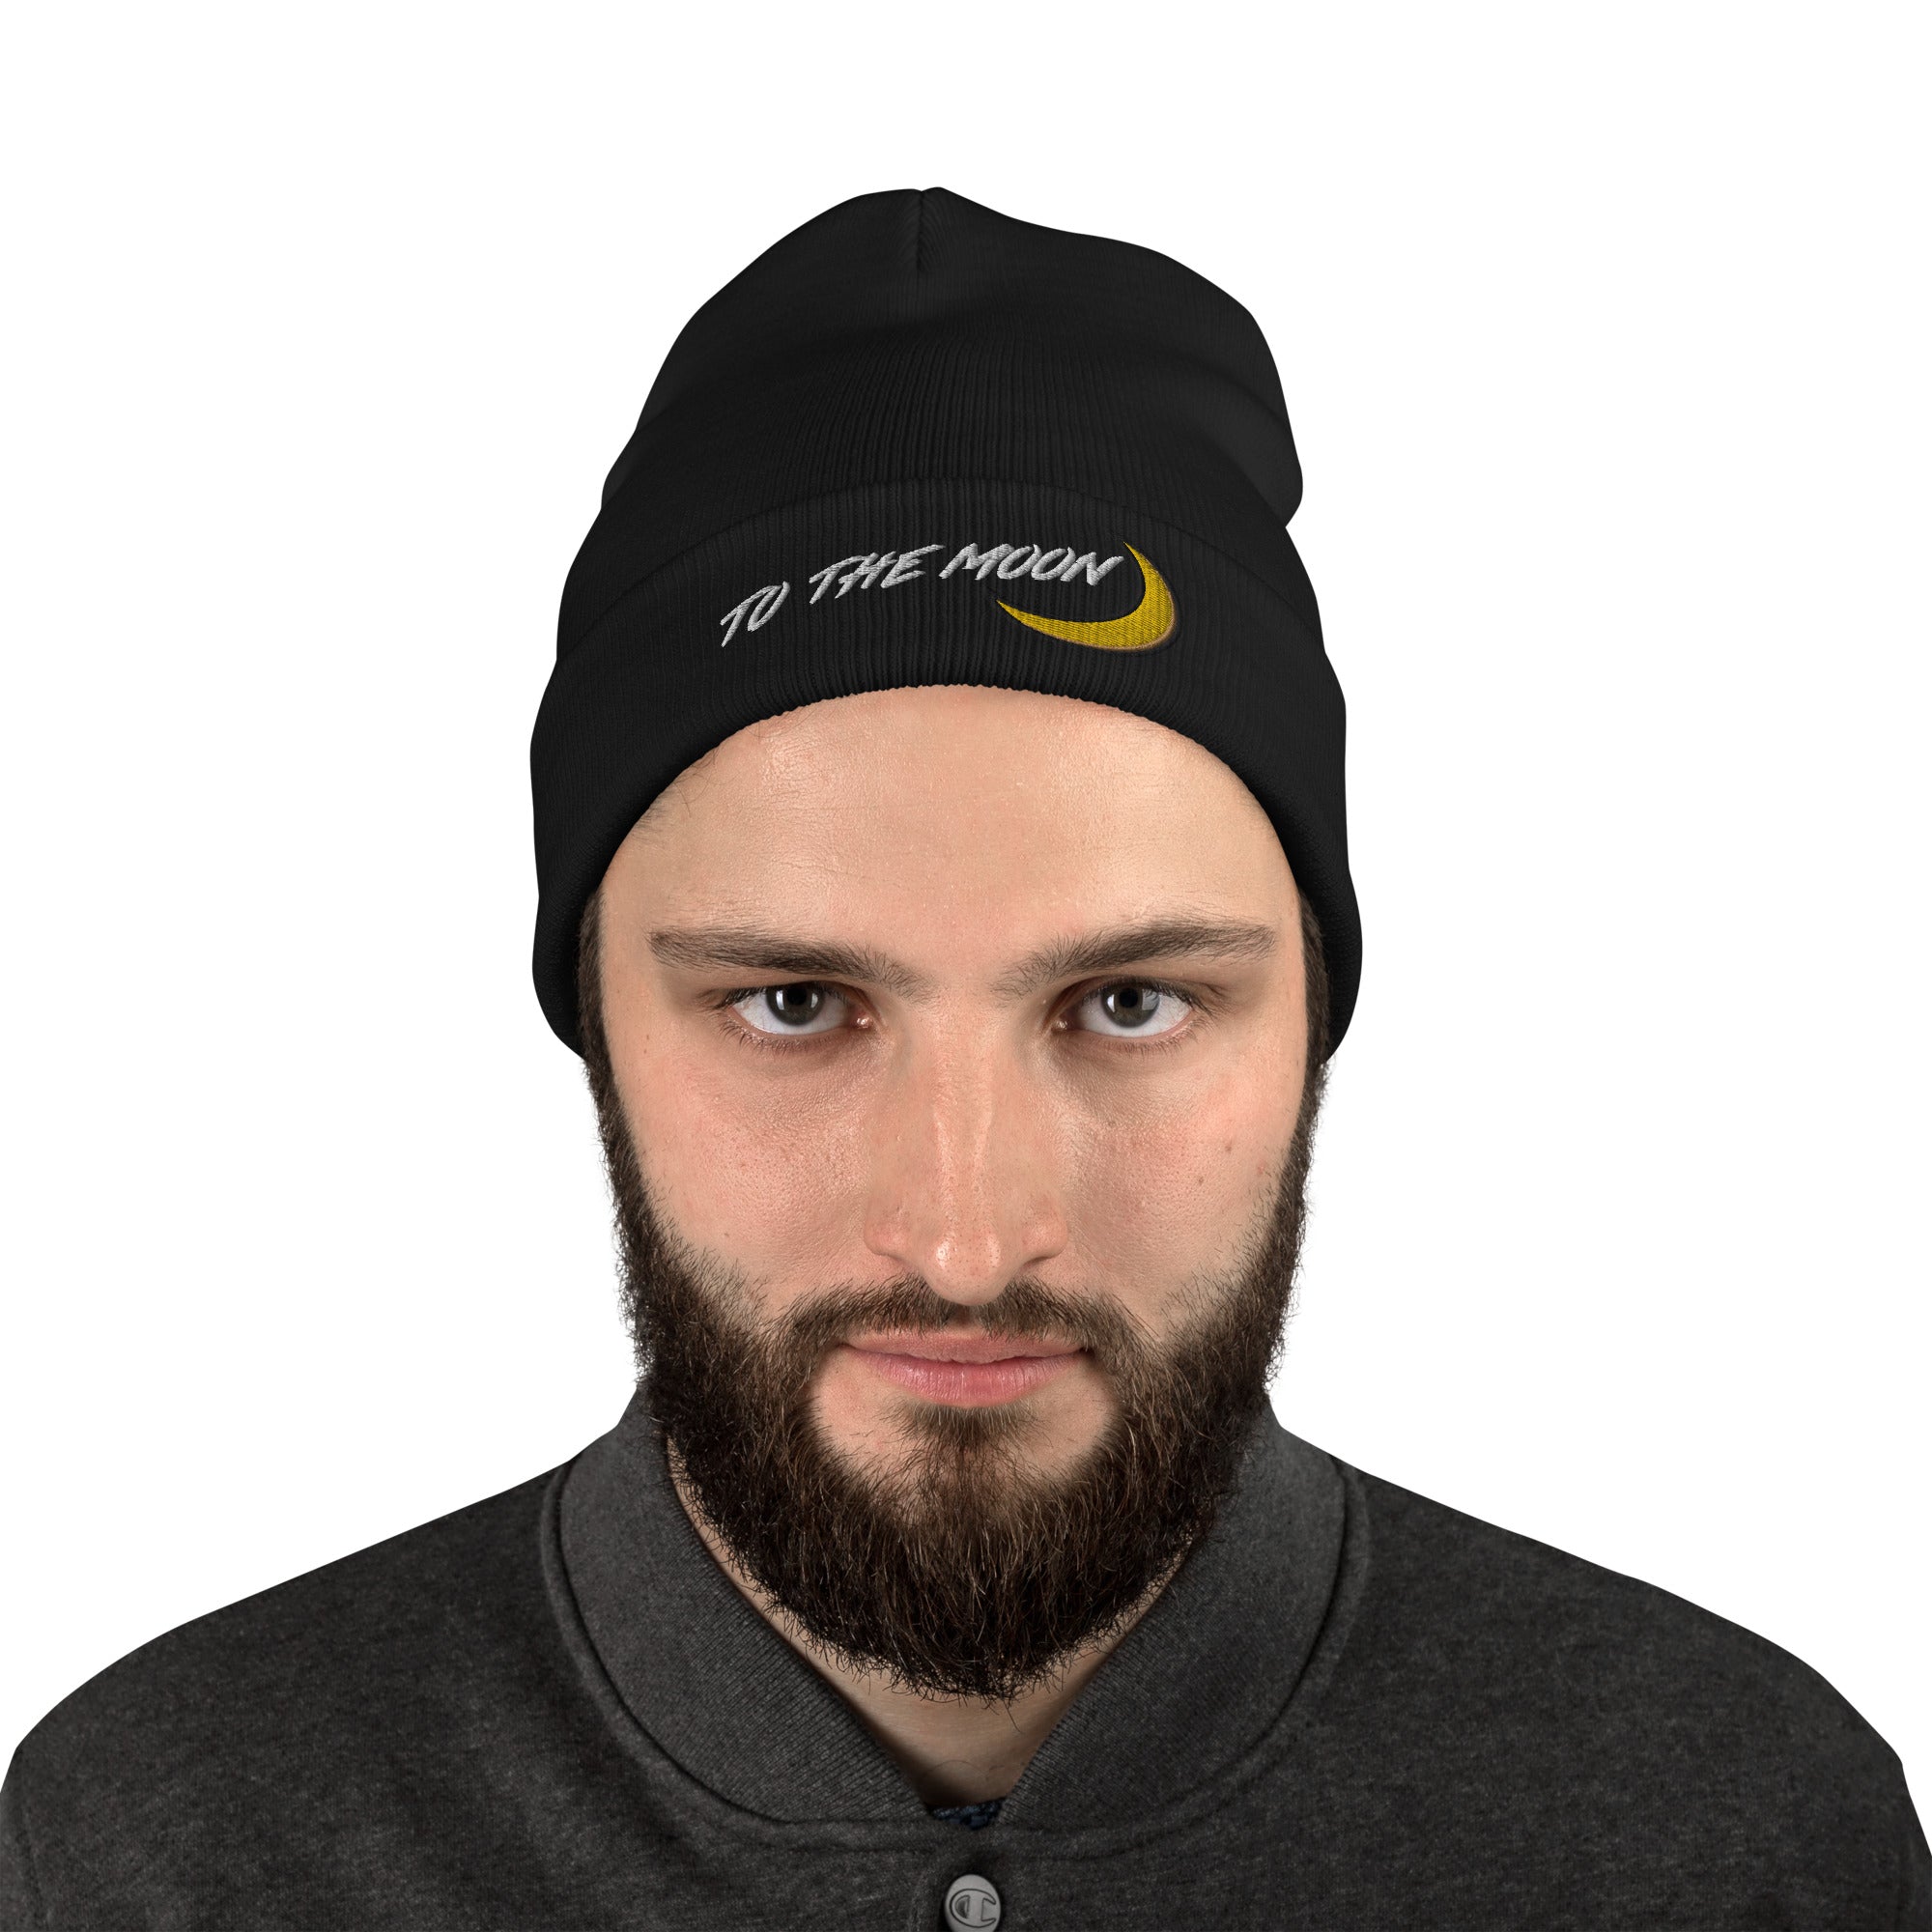 To The Moon Crypto Tokens Coins NFT Embroidered Cuff Beanie Cap